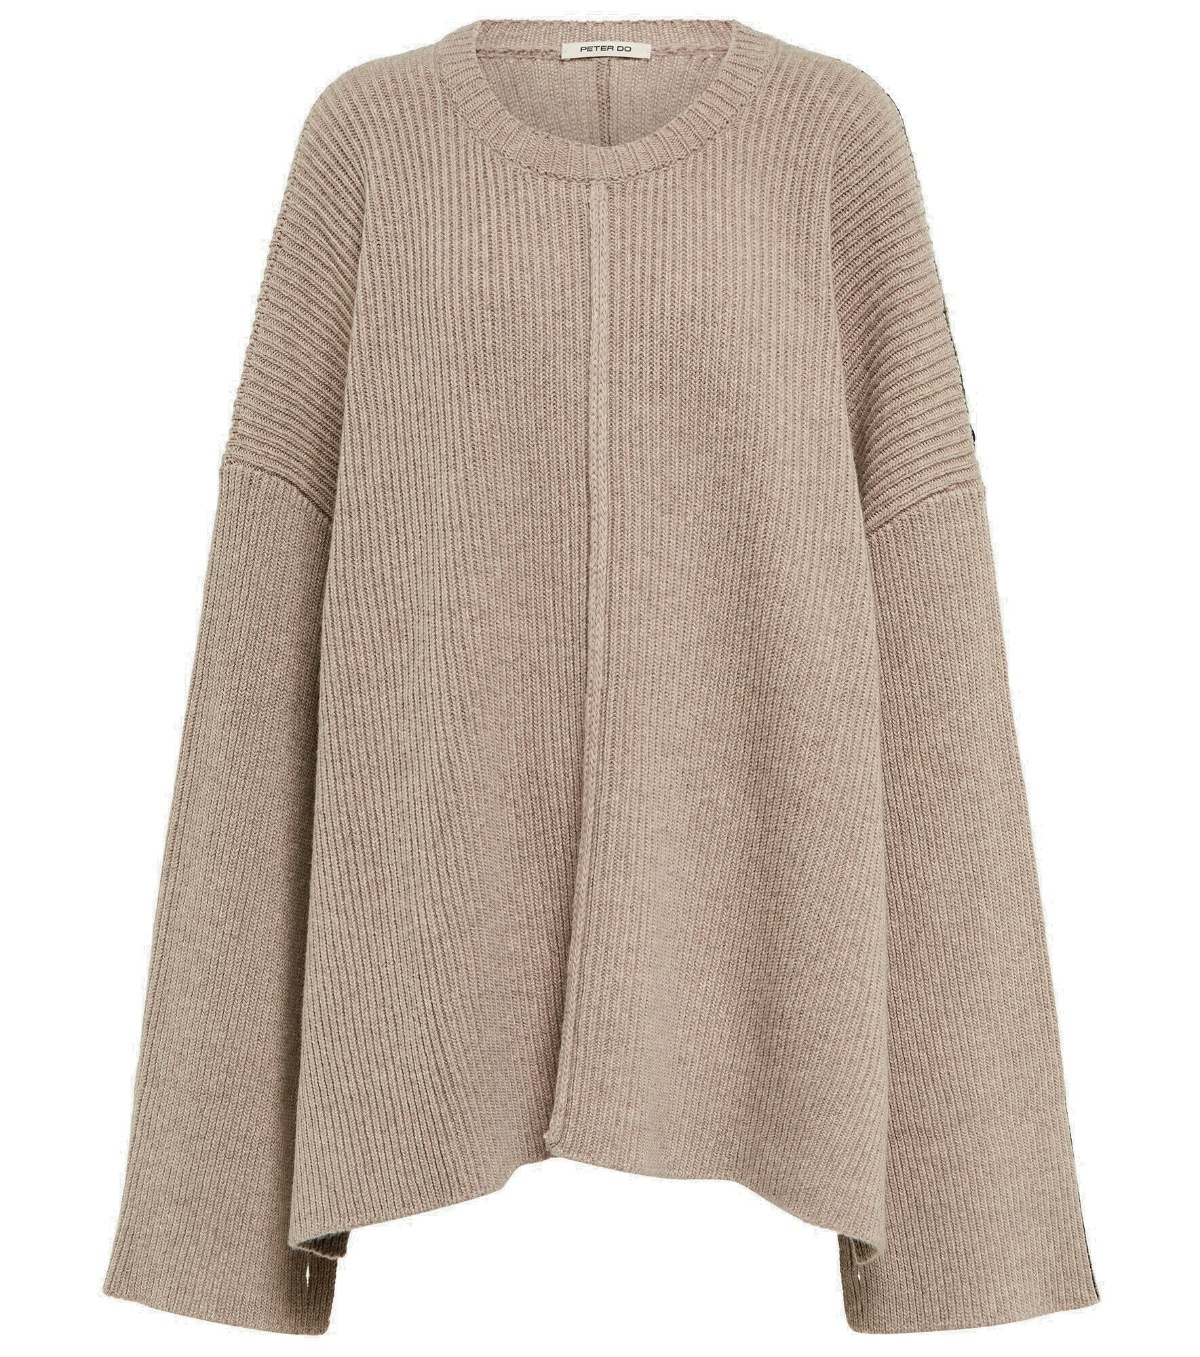 Photo: Peter Do - Oversized wool and cashmere sweater